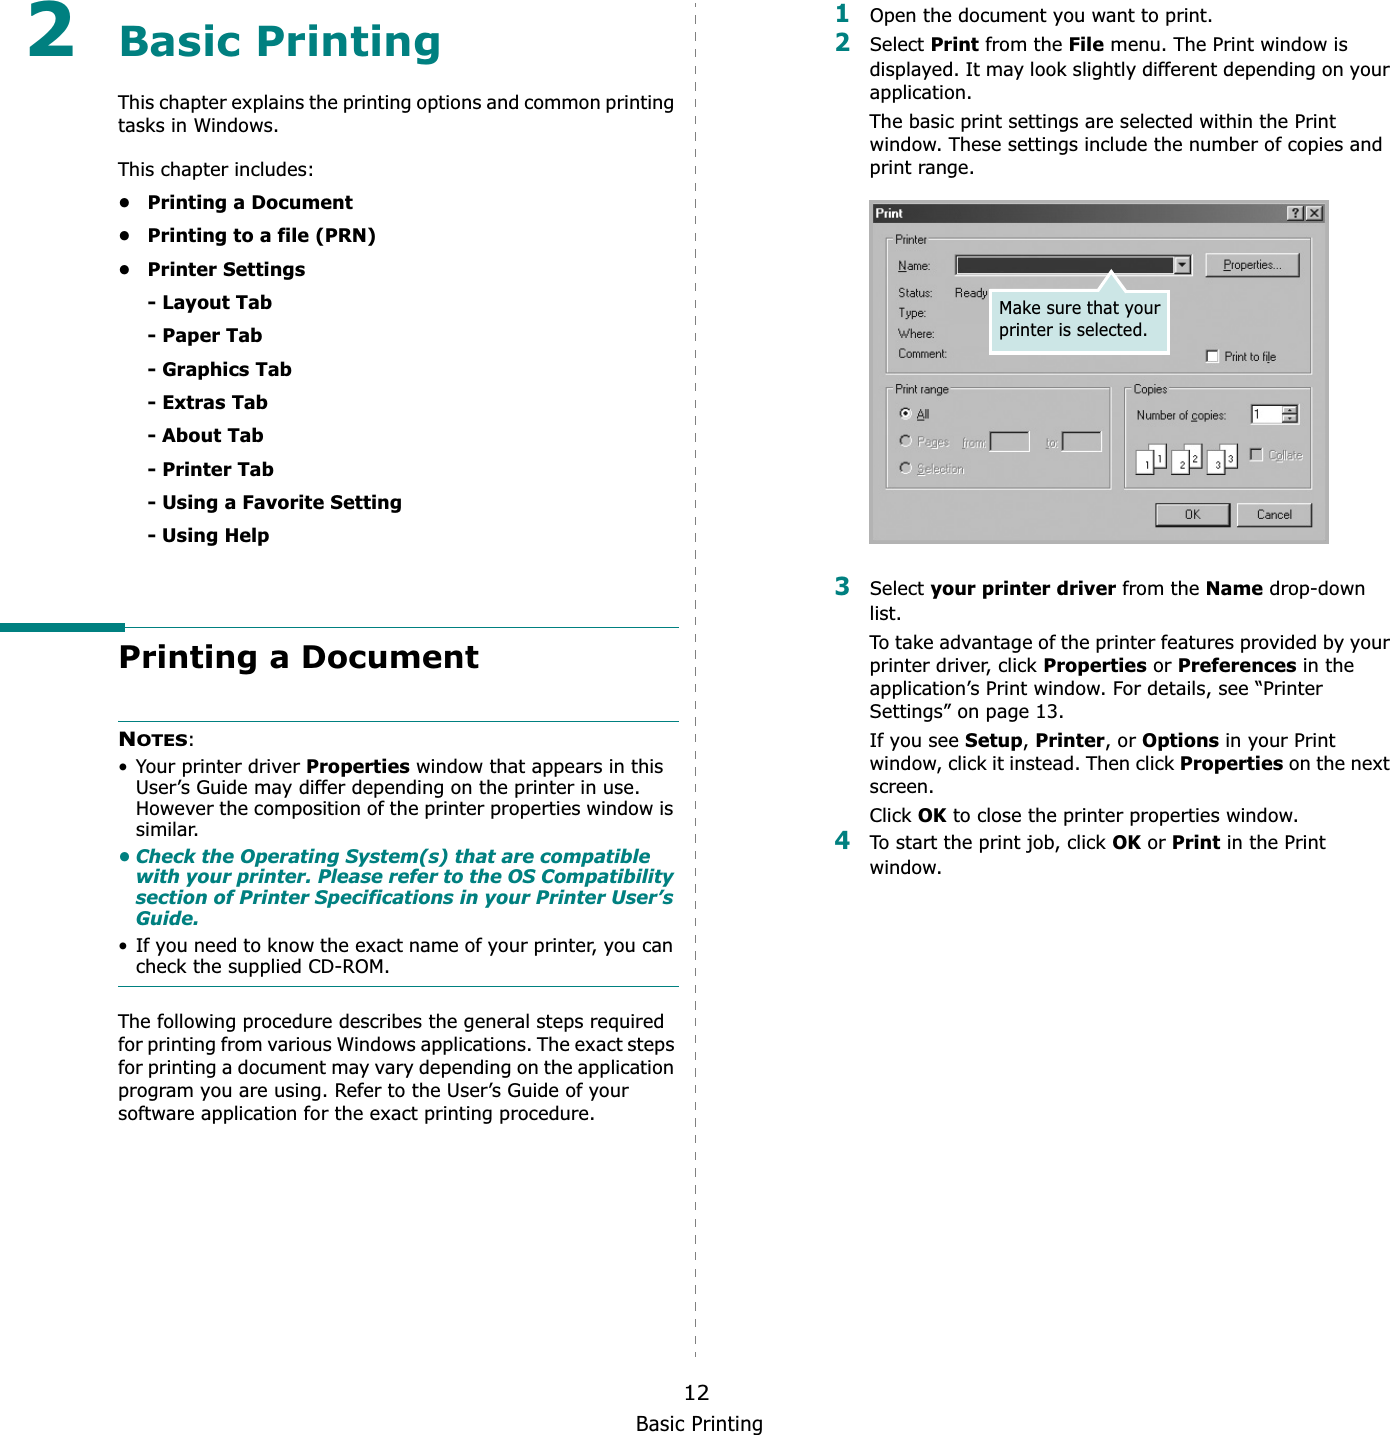 Basic Printing122Basic Printing This chapter explains the printing options and common printing tasks in Windows. This chapter includes:• Printing a Document• Printing to a file (PRN)•Printer Settings- Layout Tab- Paper Tab- Graphics Tab- Extras Tab- About Tab- Printer Tab- Using a Favorite Setting- Using HelpPrinting a DocumentNOTES:• Your printer driver Properties window that appears in this User’s Guide may differ depending on the printer in use. However the composition of the printer properties window is similar.• Check the Operating System(s) that are compatible with your printer. Please refer to the OS Compatibility section of Printer Specifications in your Printer User’s Guide.• If you need to know the exact name of your printer, you can check the supplied CD-ROM.The following procedure describes the general steps required for printing from various Windows applications. The exact steps for printing a document may vary depending on the application program you are using. Refer to the User’s Guide of your software application for the exact printing procedure.1Open the document you want to print.2Select Print from the File menu. The Print window is displayed. It may look slightly different depending on your application. The basic print settings are selected within the Print window. These settings include the number of copies and print range.3Select your printer driver from the Name drop-down list.To take advantage of the printer features provided by your printer driver, click Properties or Preferences in the application’s Print window. For details, see “Printer Settings” on page 13.If you see Setup,Printer, or Options in your Print window, click it instead. Then click Properties on the next screen.Click OK to close the printer properties window.4To start the print job, click OK or Print in the Print window.Make sure that your printer is selected.